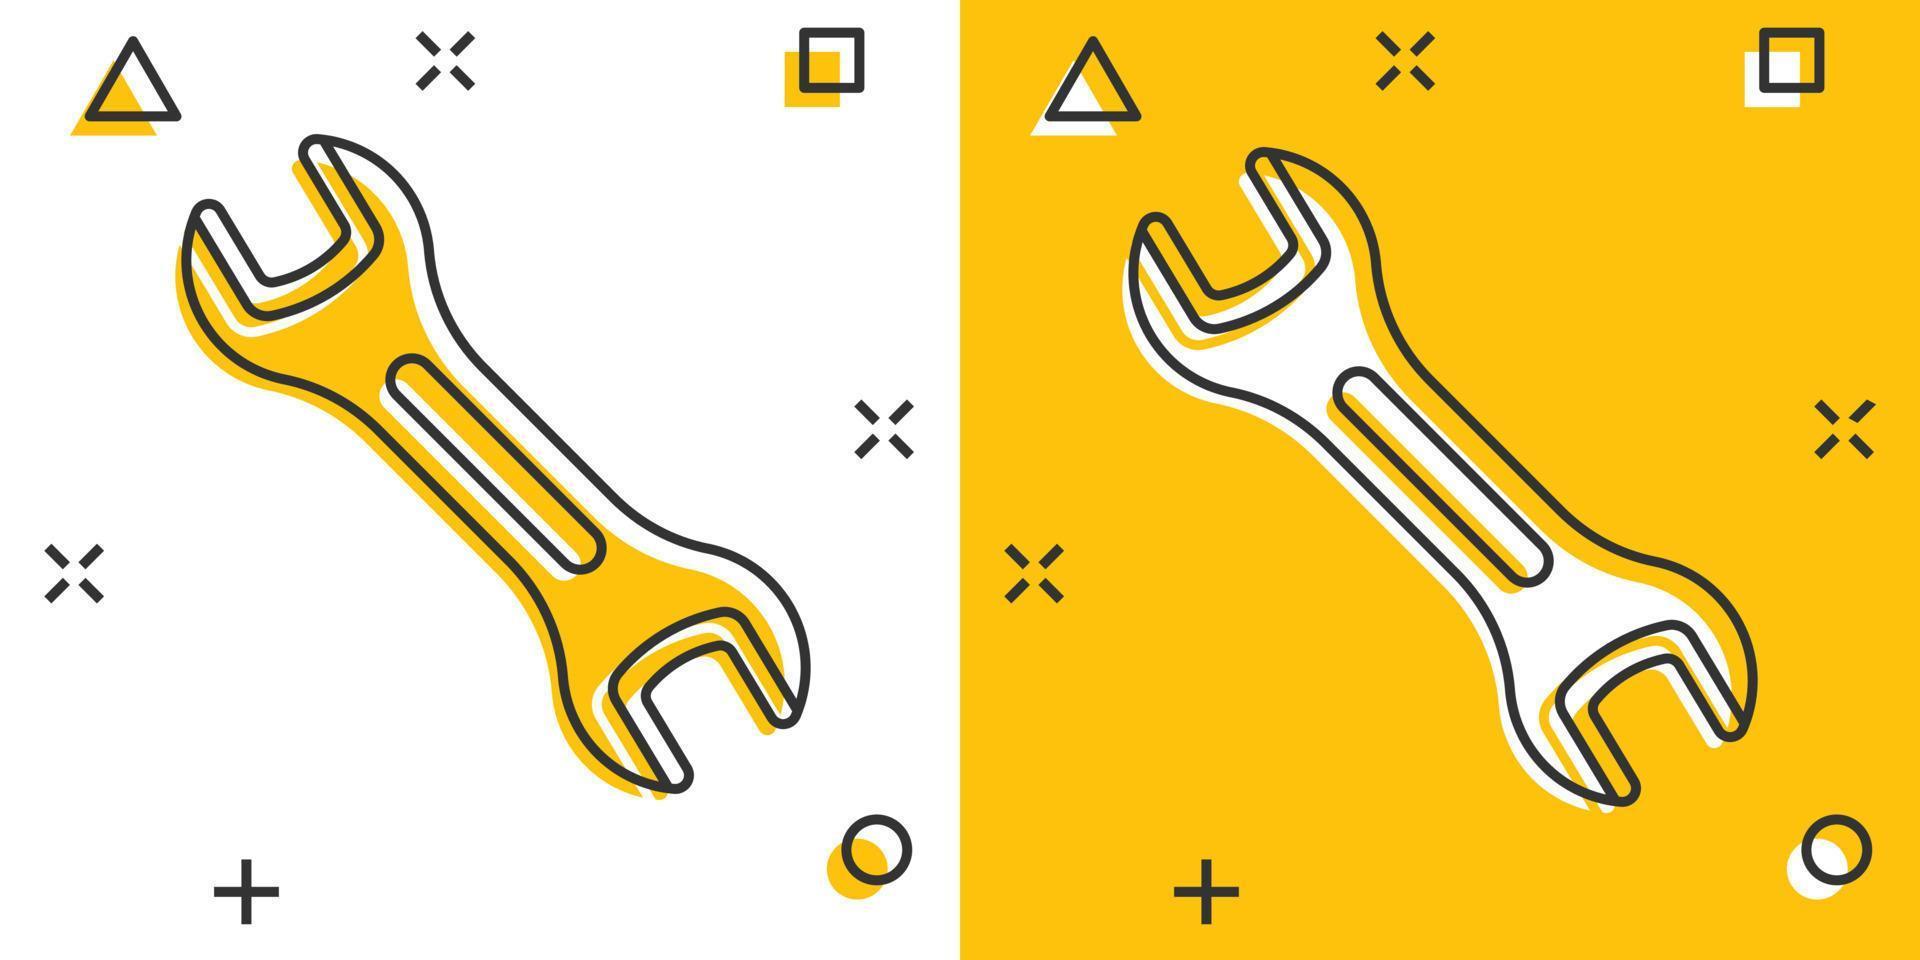 Wrench icon in comic style. Spanner key cartoon vector illustration on white isolated background. Repair equipment splash effect business concept.